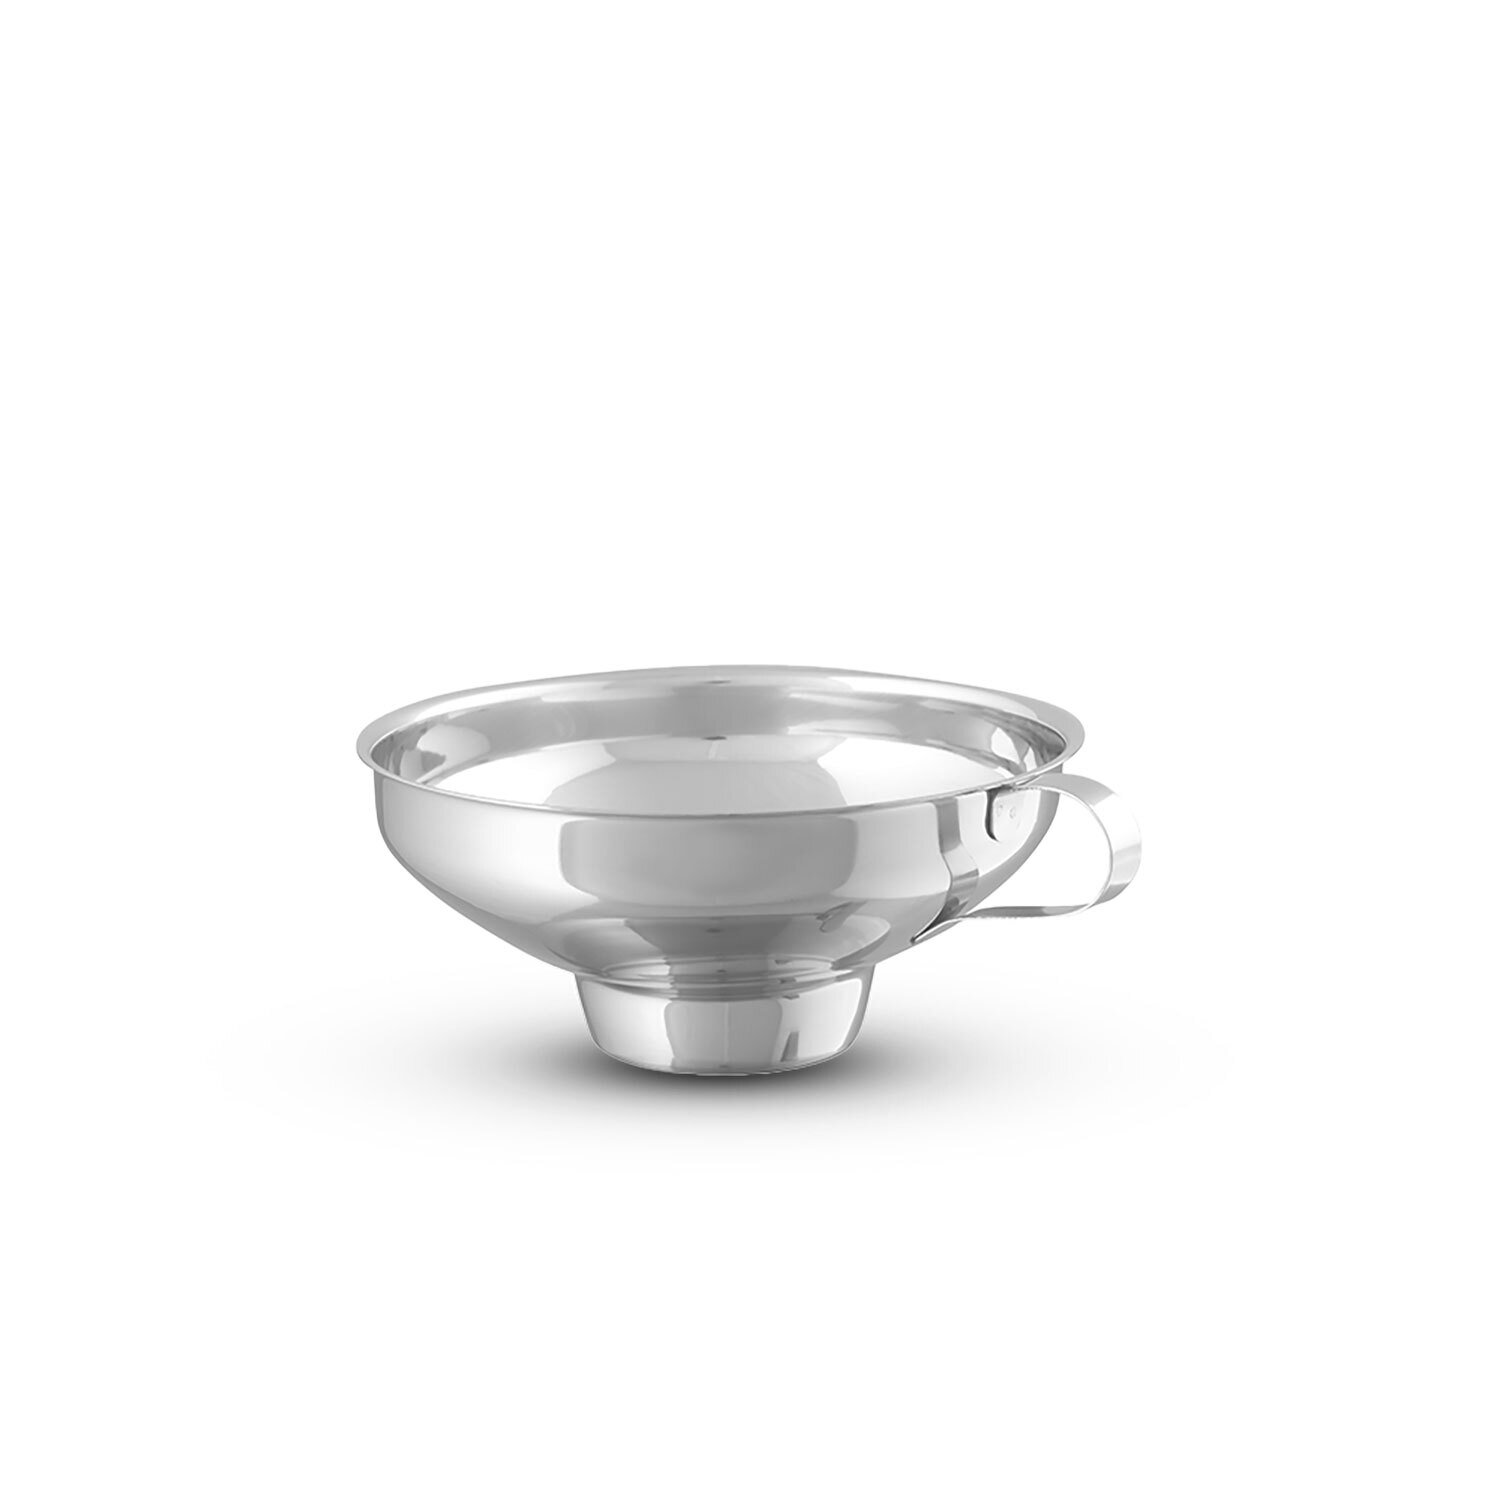 Mauviel Stainless Steel Jam Funnel 5.1 Inch 448002